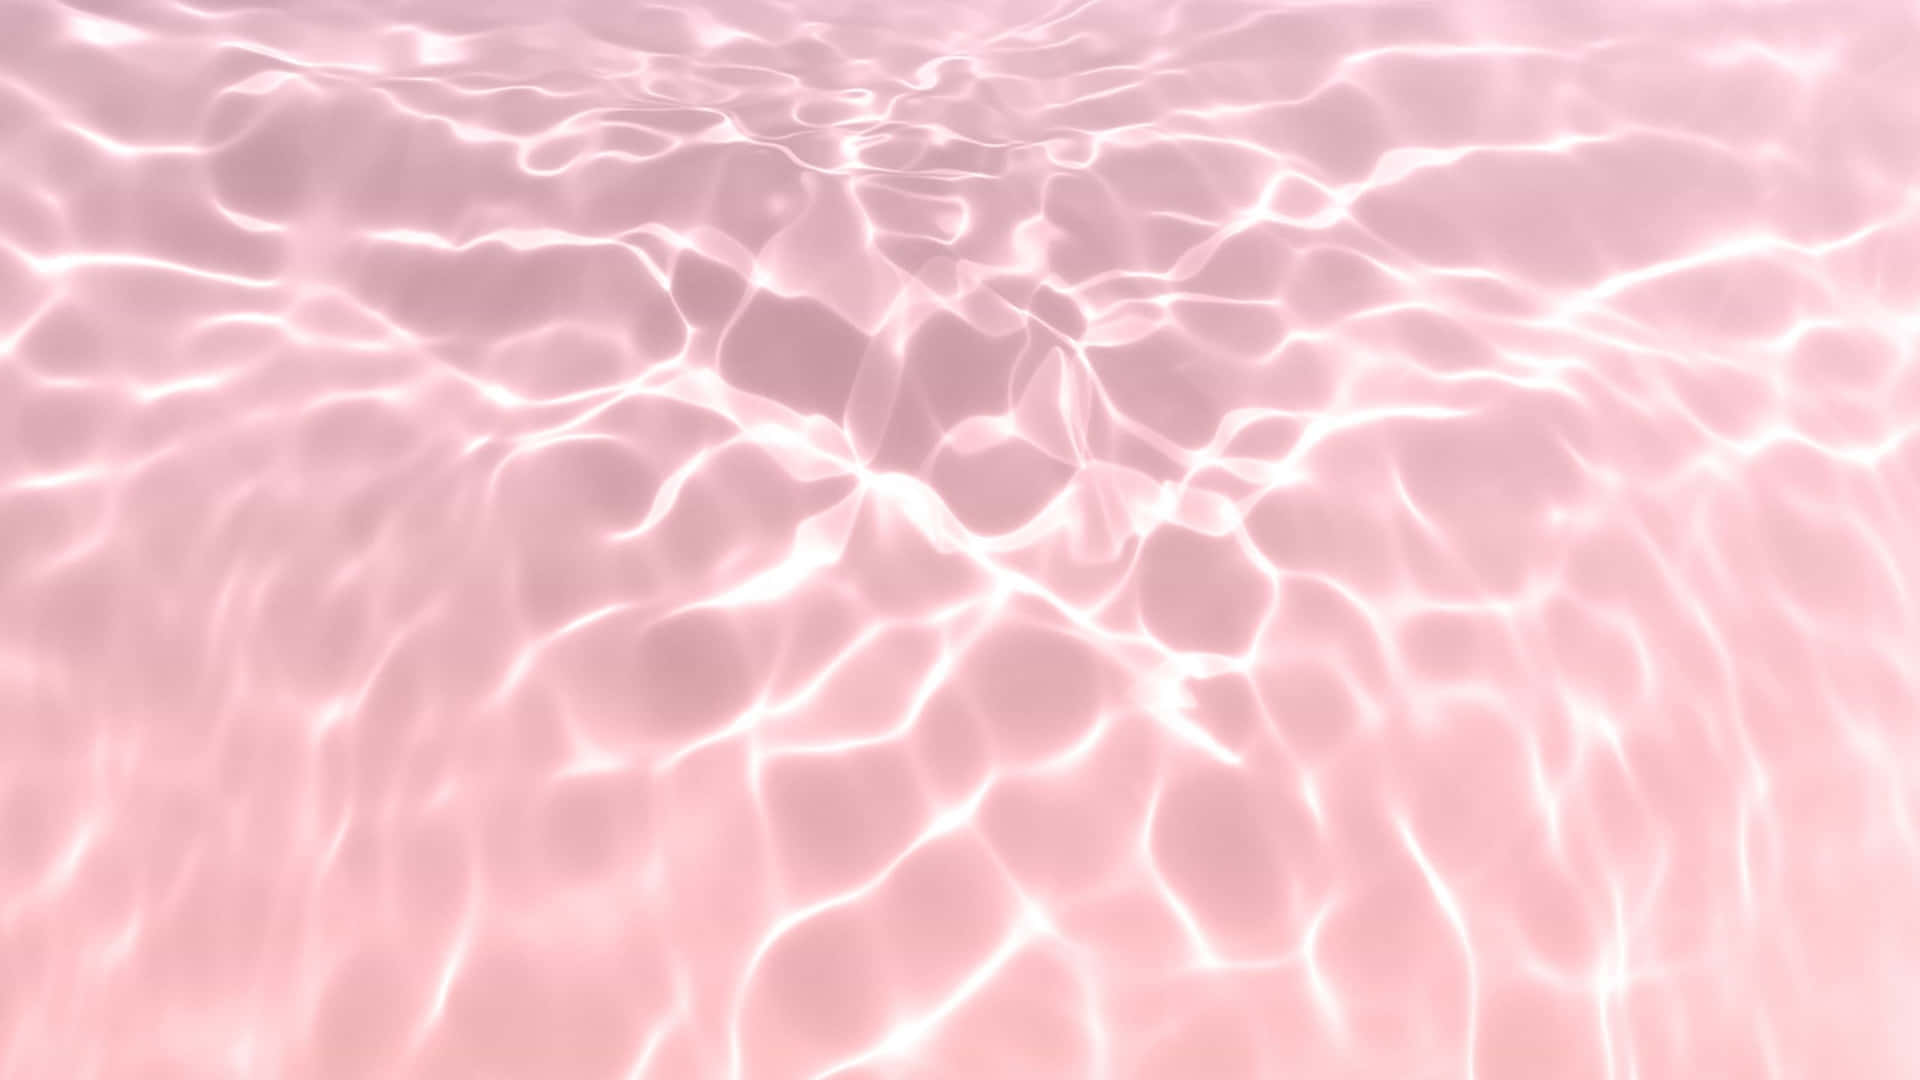 Download Pink Water Ripples Background Wallpaper | Wallpapers.com